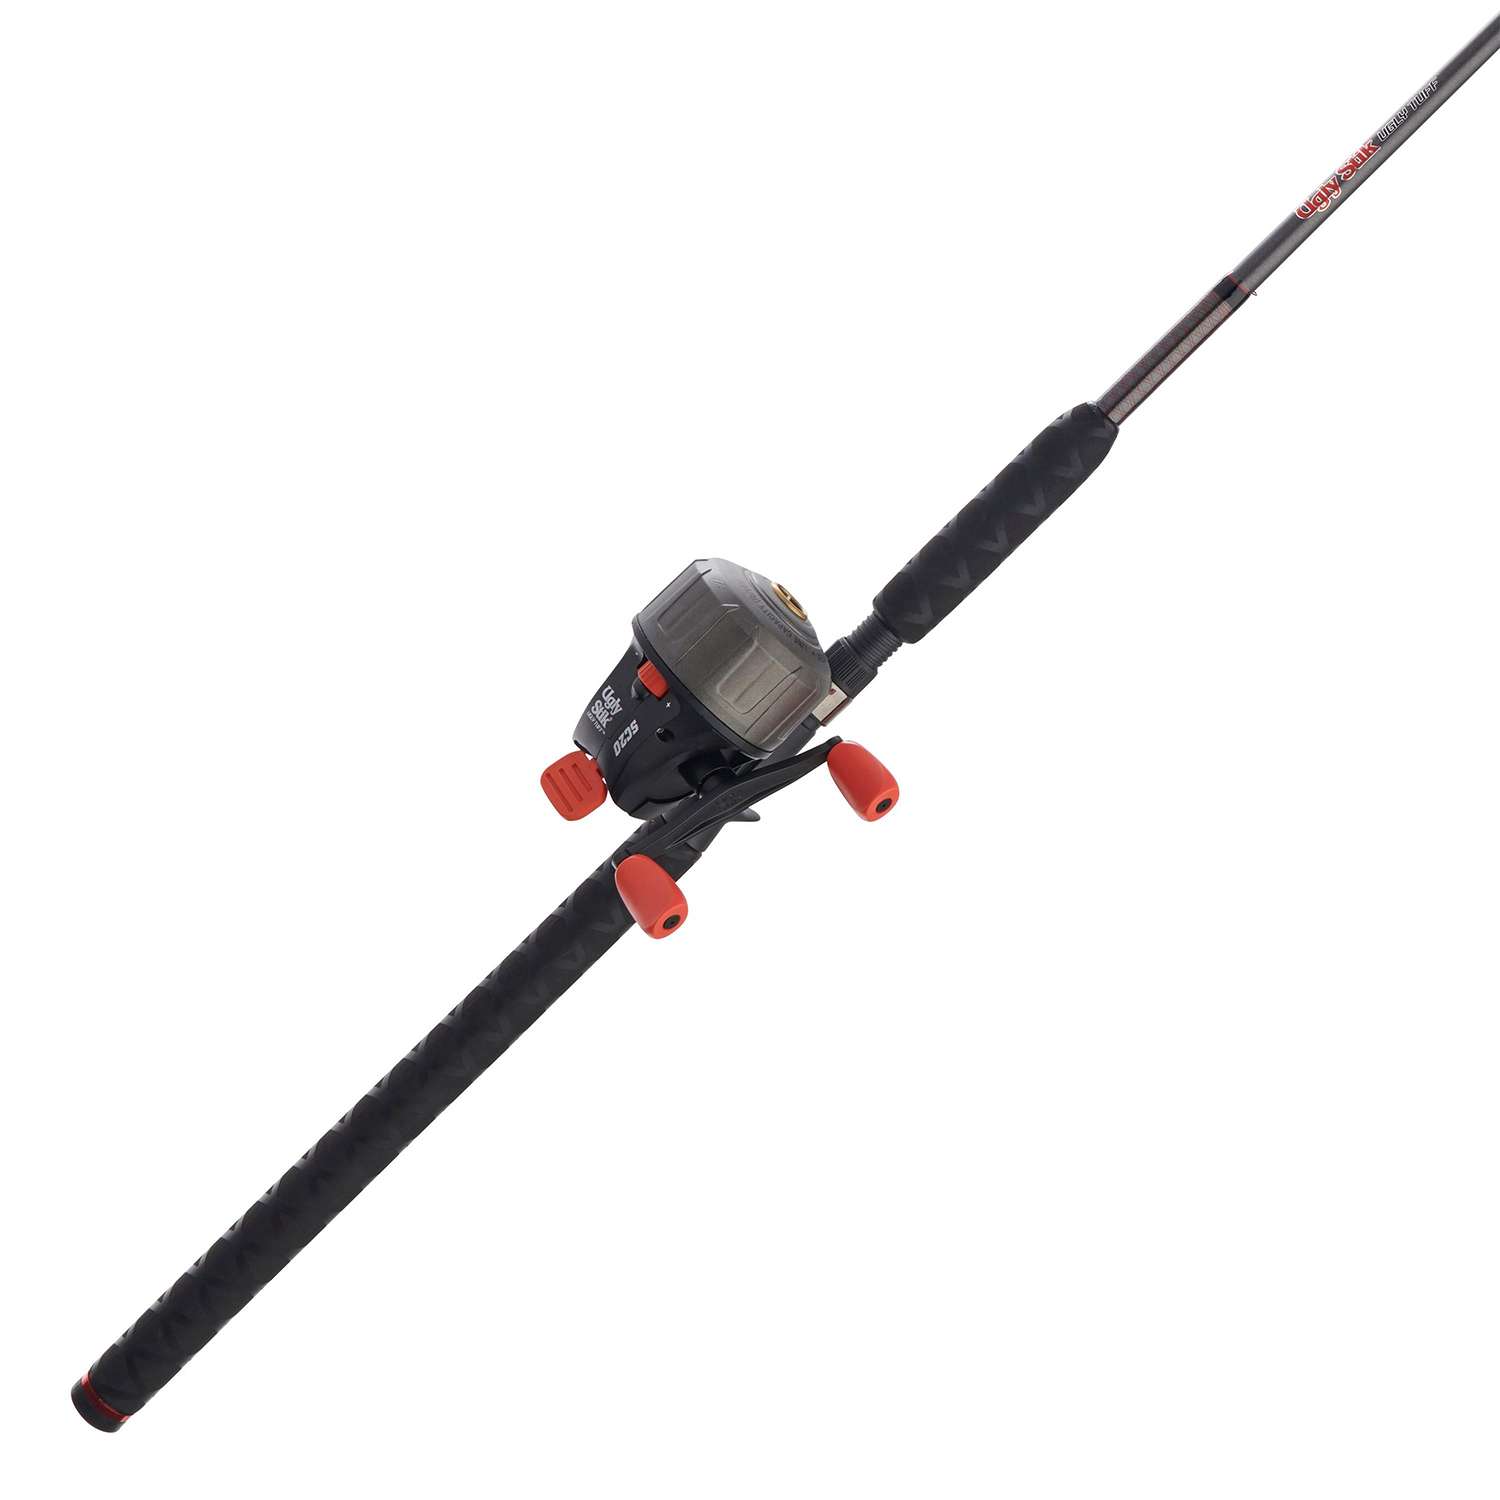 ugly stik tuff Today's Deals - OFF 63%